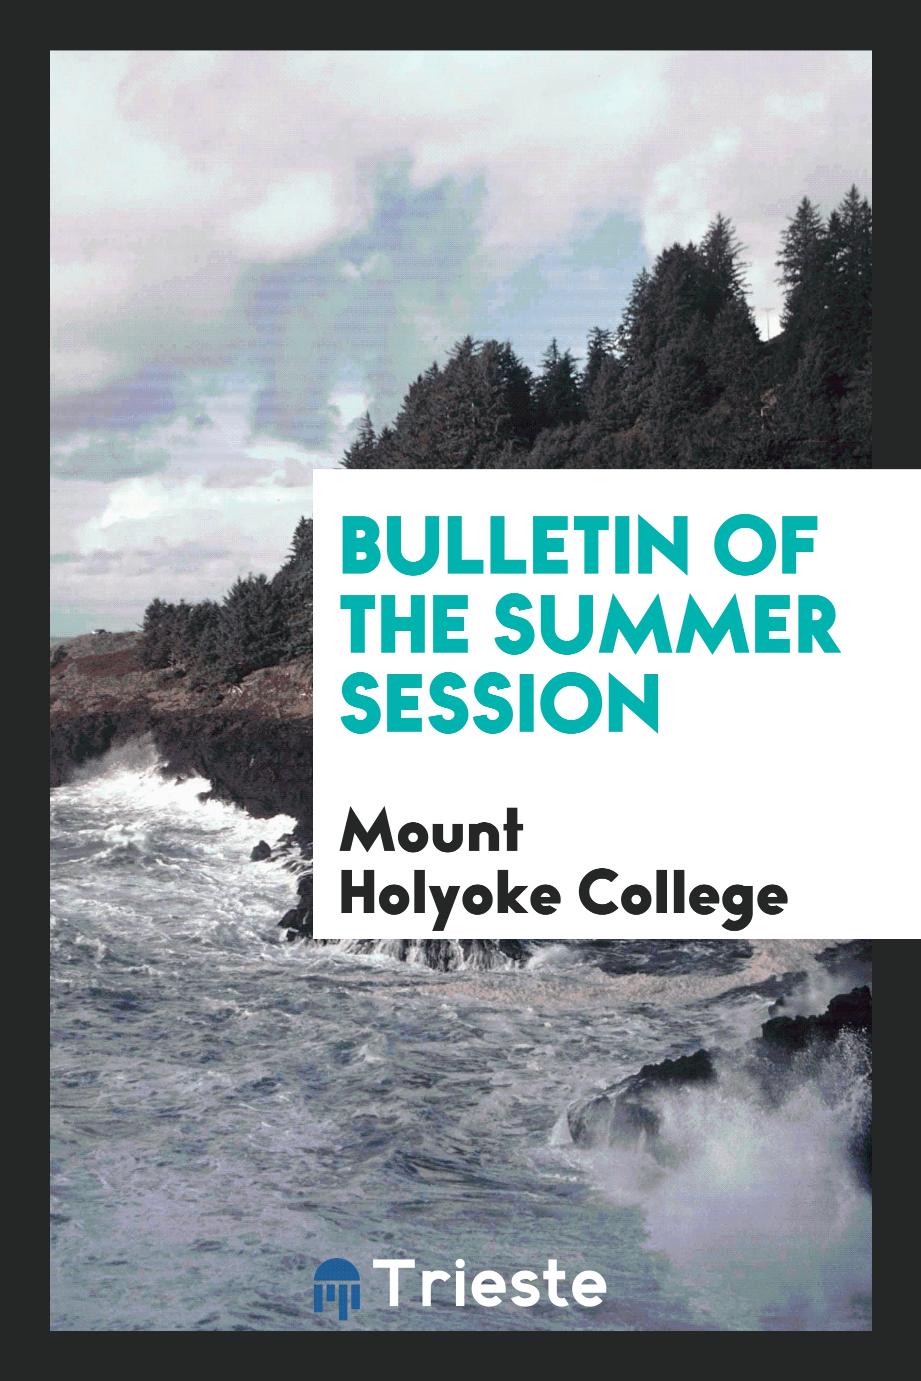 Bulletin of the Summer Session